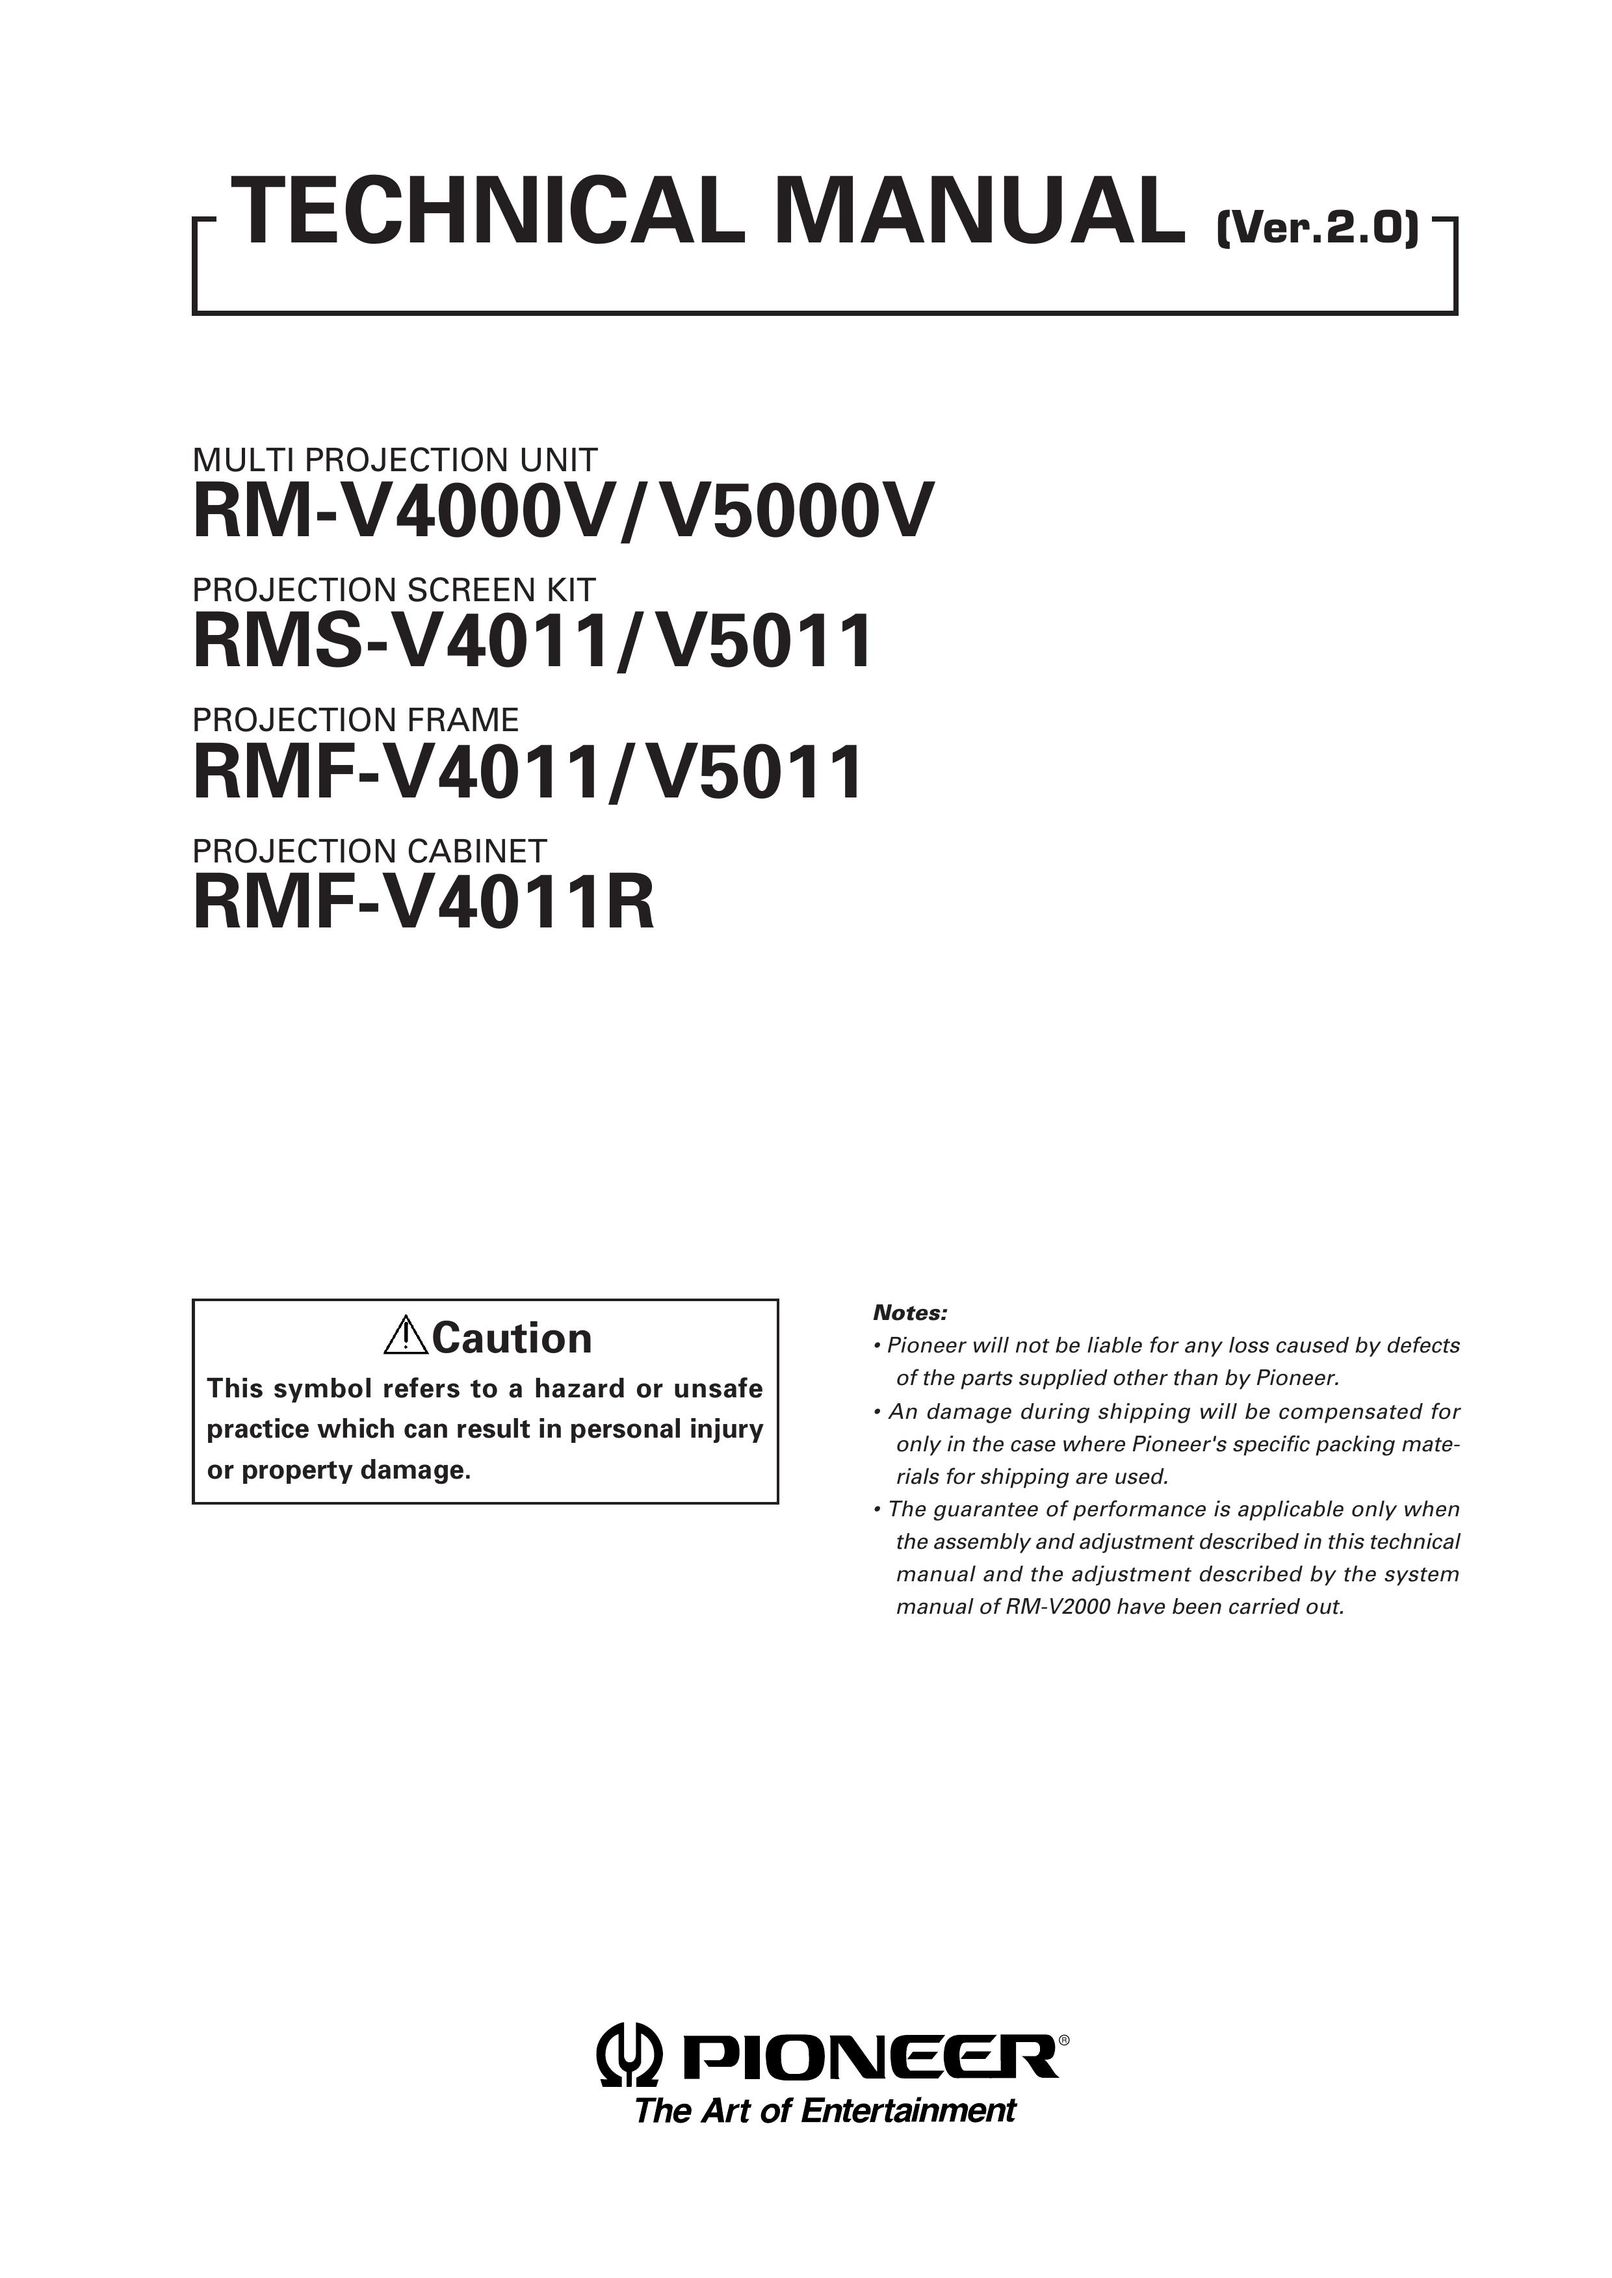 Pioneer RMS-V4011 Projector Accessories User Manual